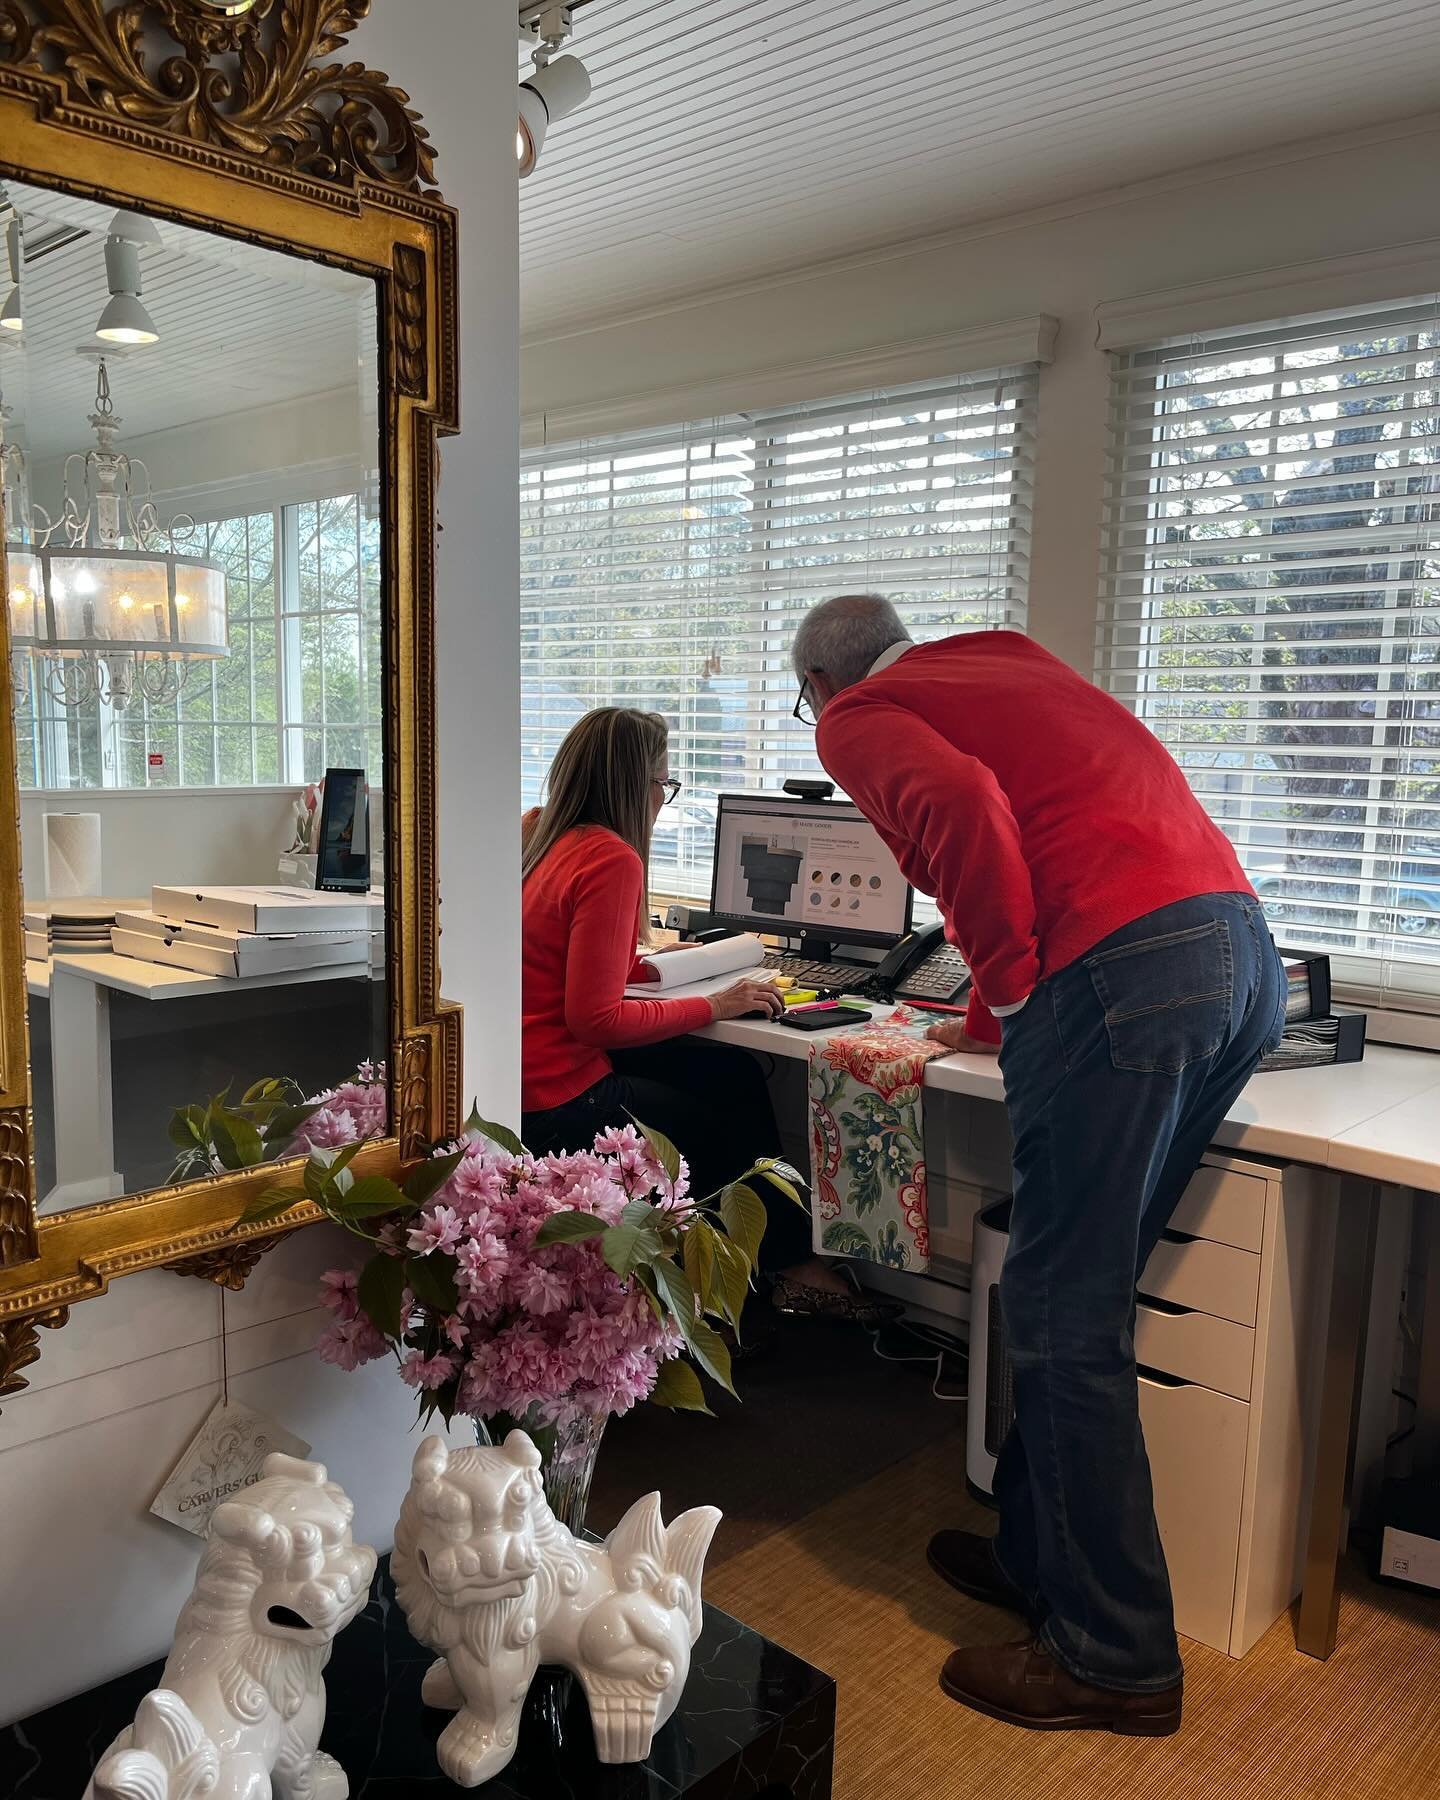 A candid moment caught of Natalie and Peter collaborating  on some retail pieces for the shop! And can we talk about their matching colors??❤️